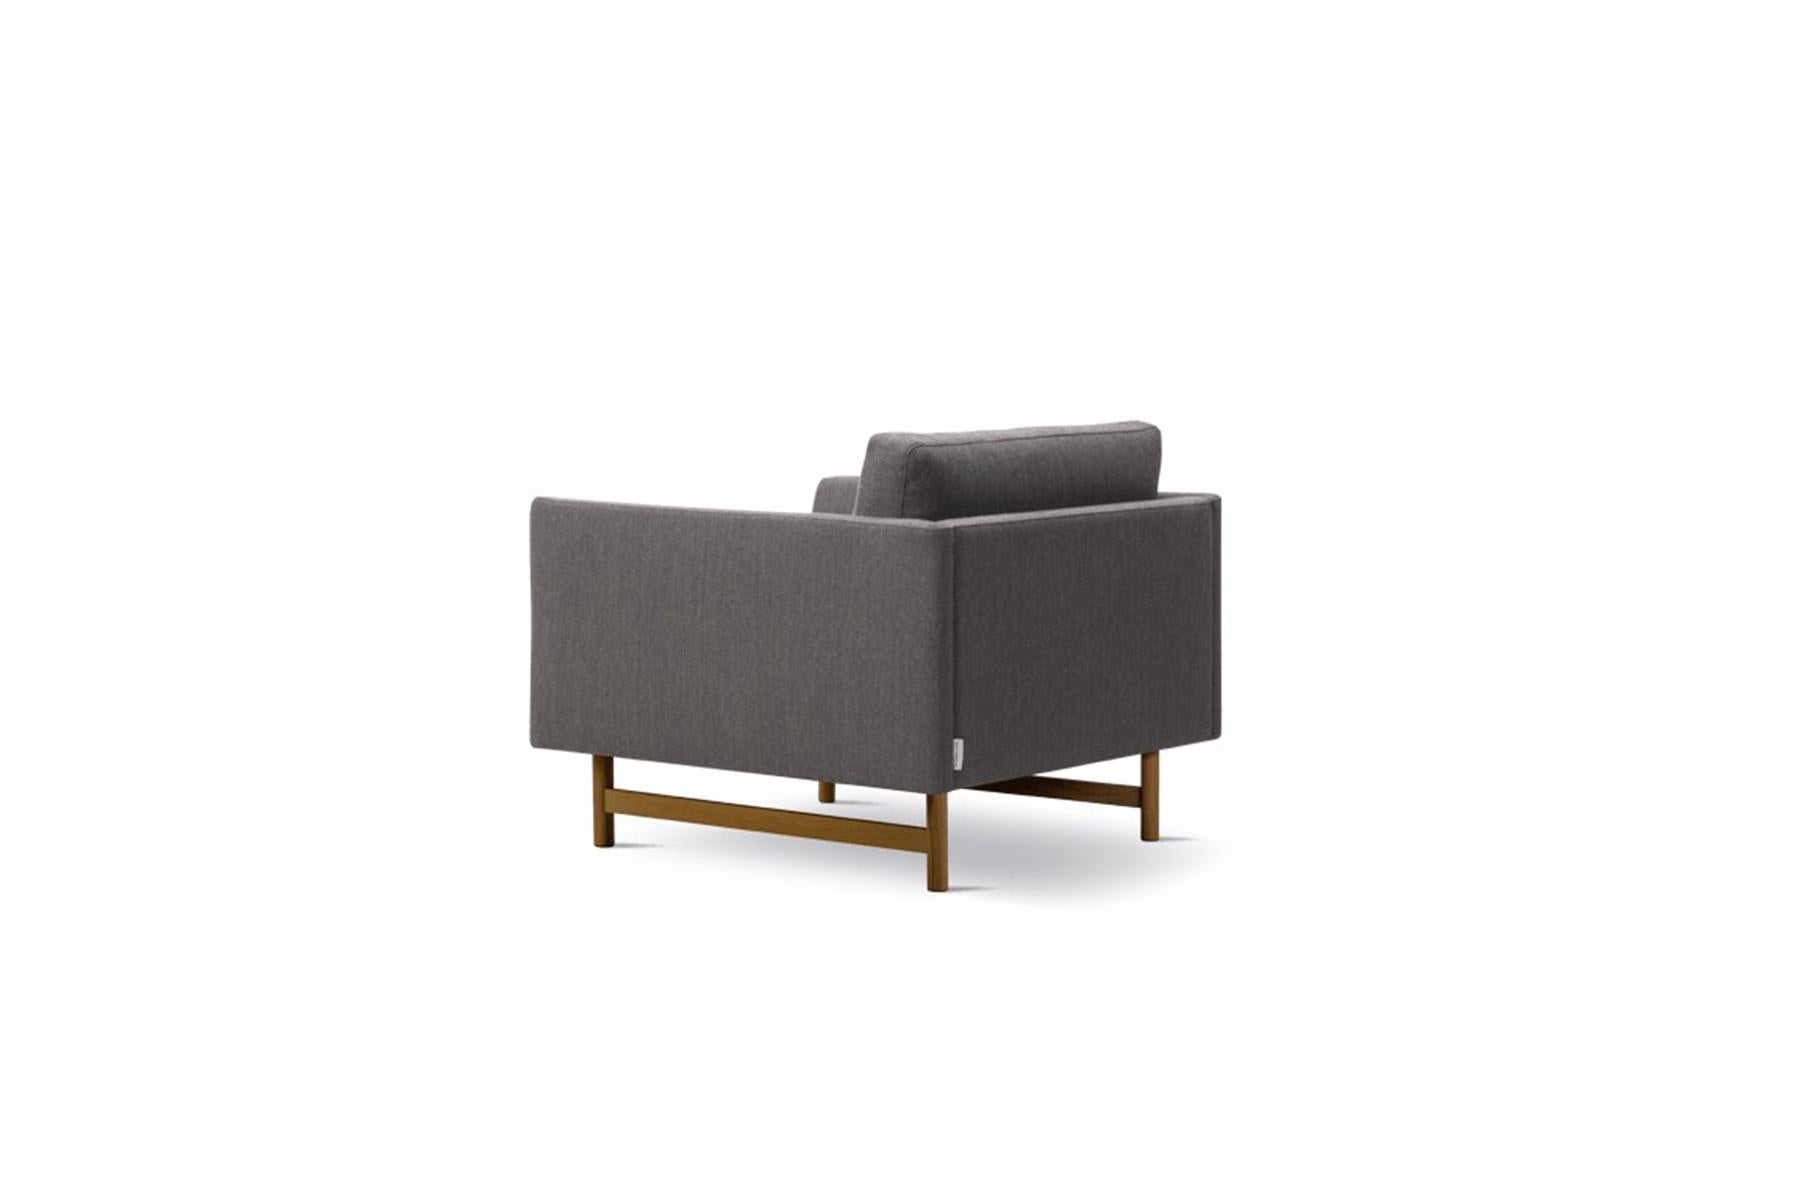 The Hugo Passos Calmo lounge chair 80 – Wood base chair boasts an elegant linear look, with a graceful curve inside each arm rest as a discrete signature detail. In this ideal addition to any living room scenario.